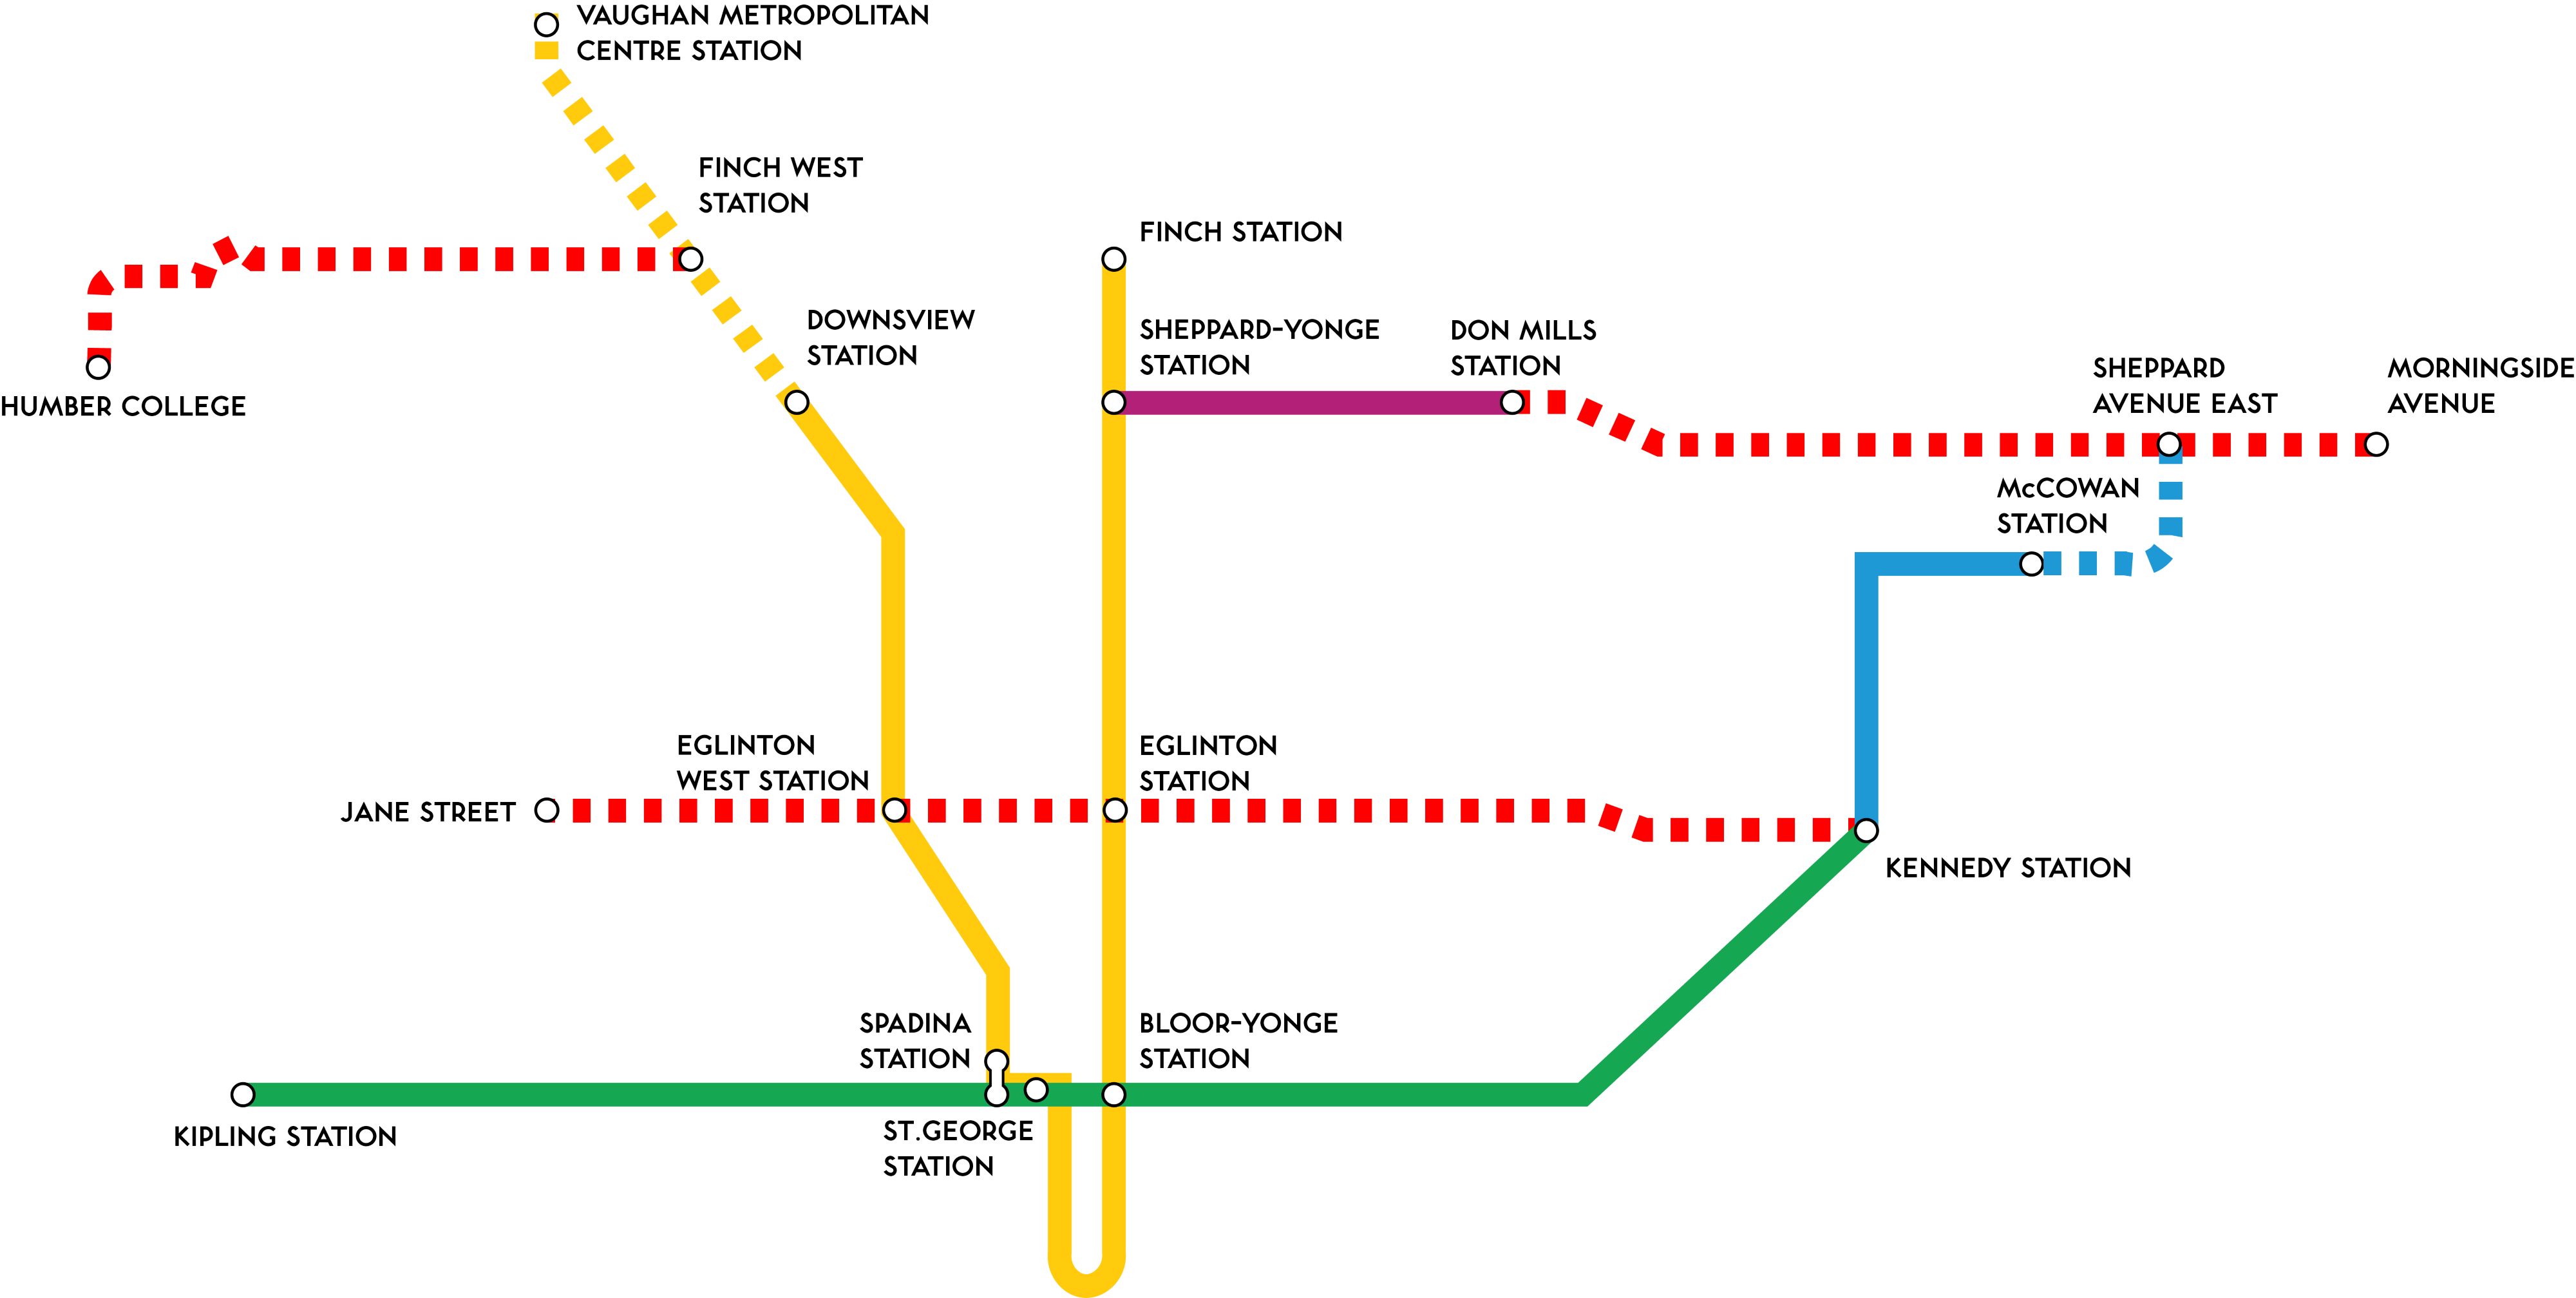 This image shows the network of transit lines that were fully funded prior to their cancellation by Rob Ford. It features the Finch West LRT, the Eglinton Crosstown LRT, and the Sheppard East LRT.